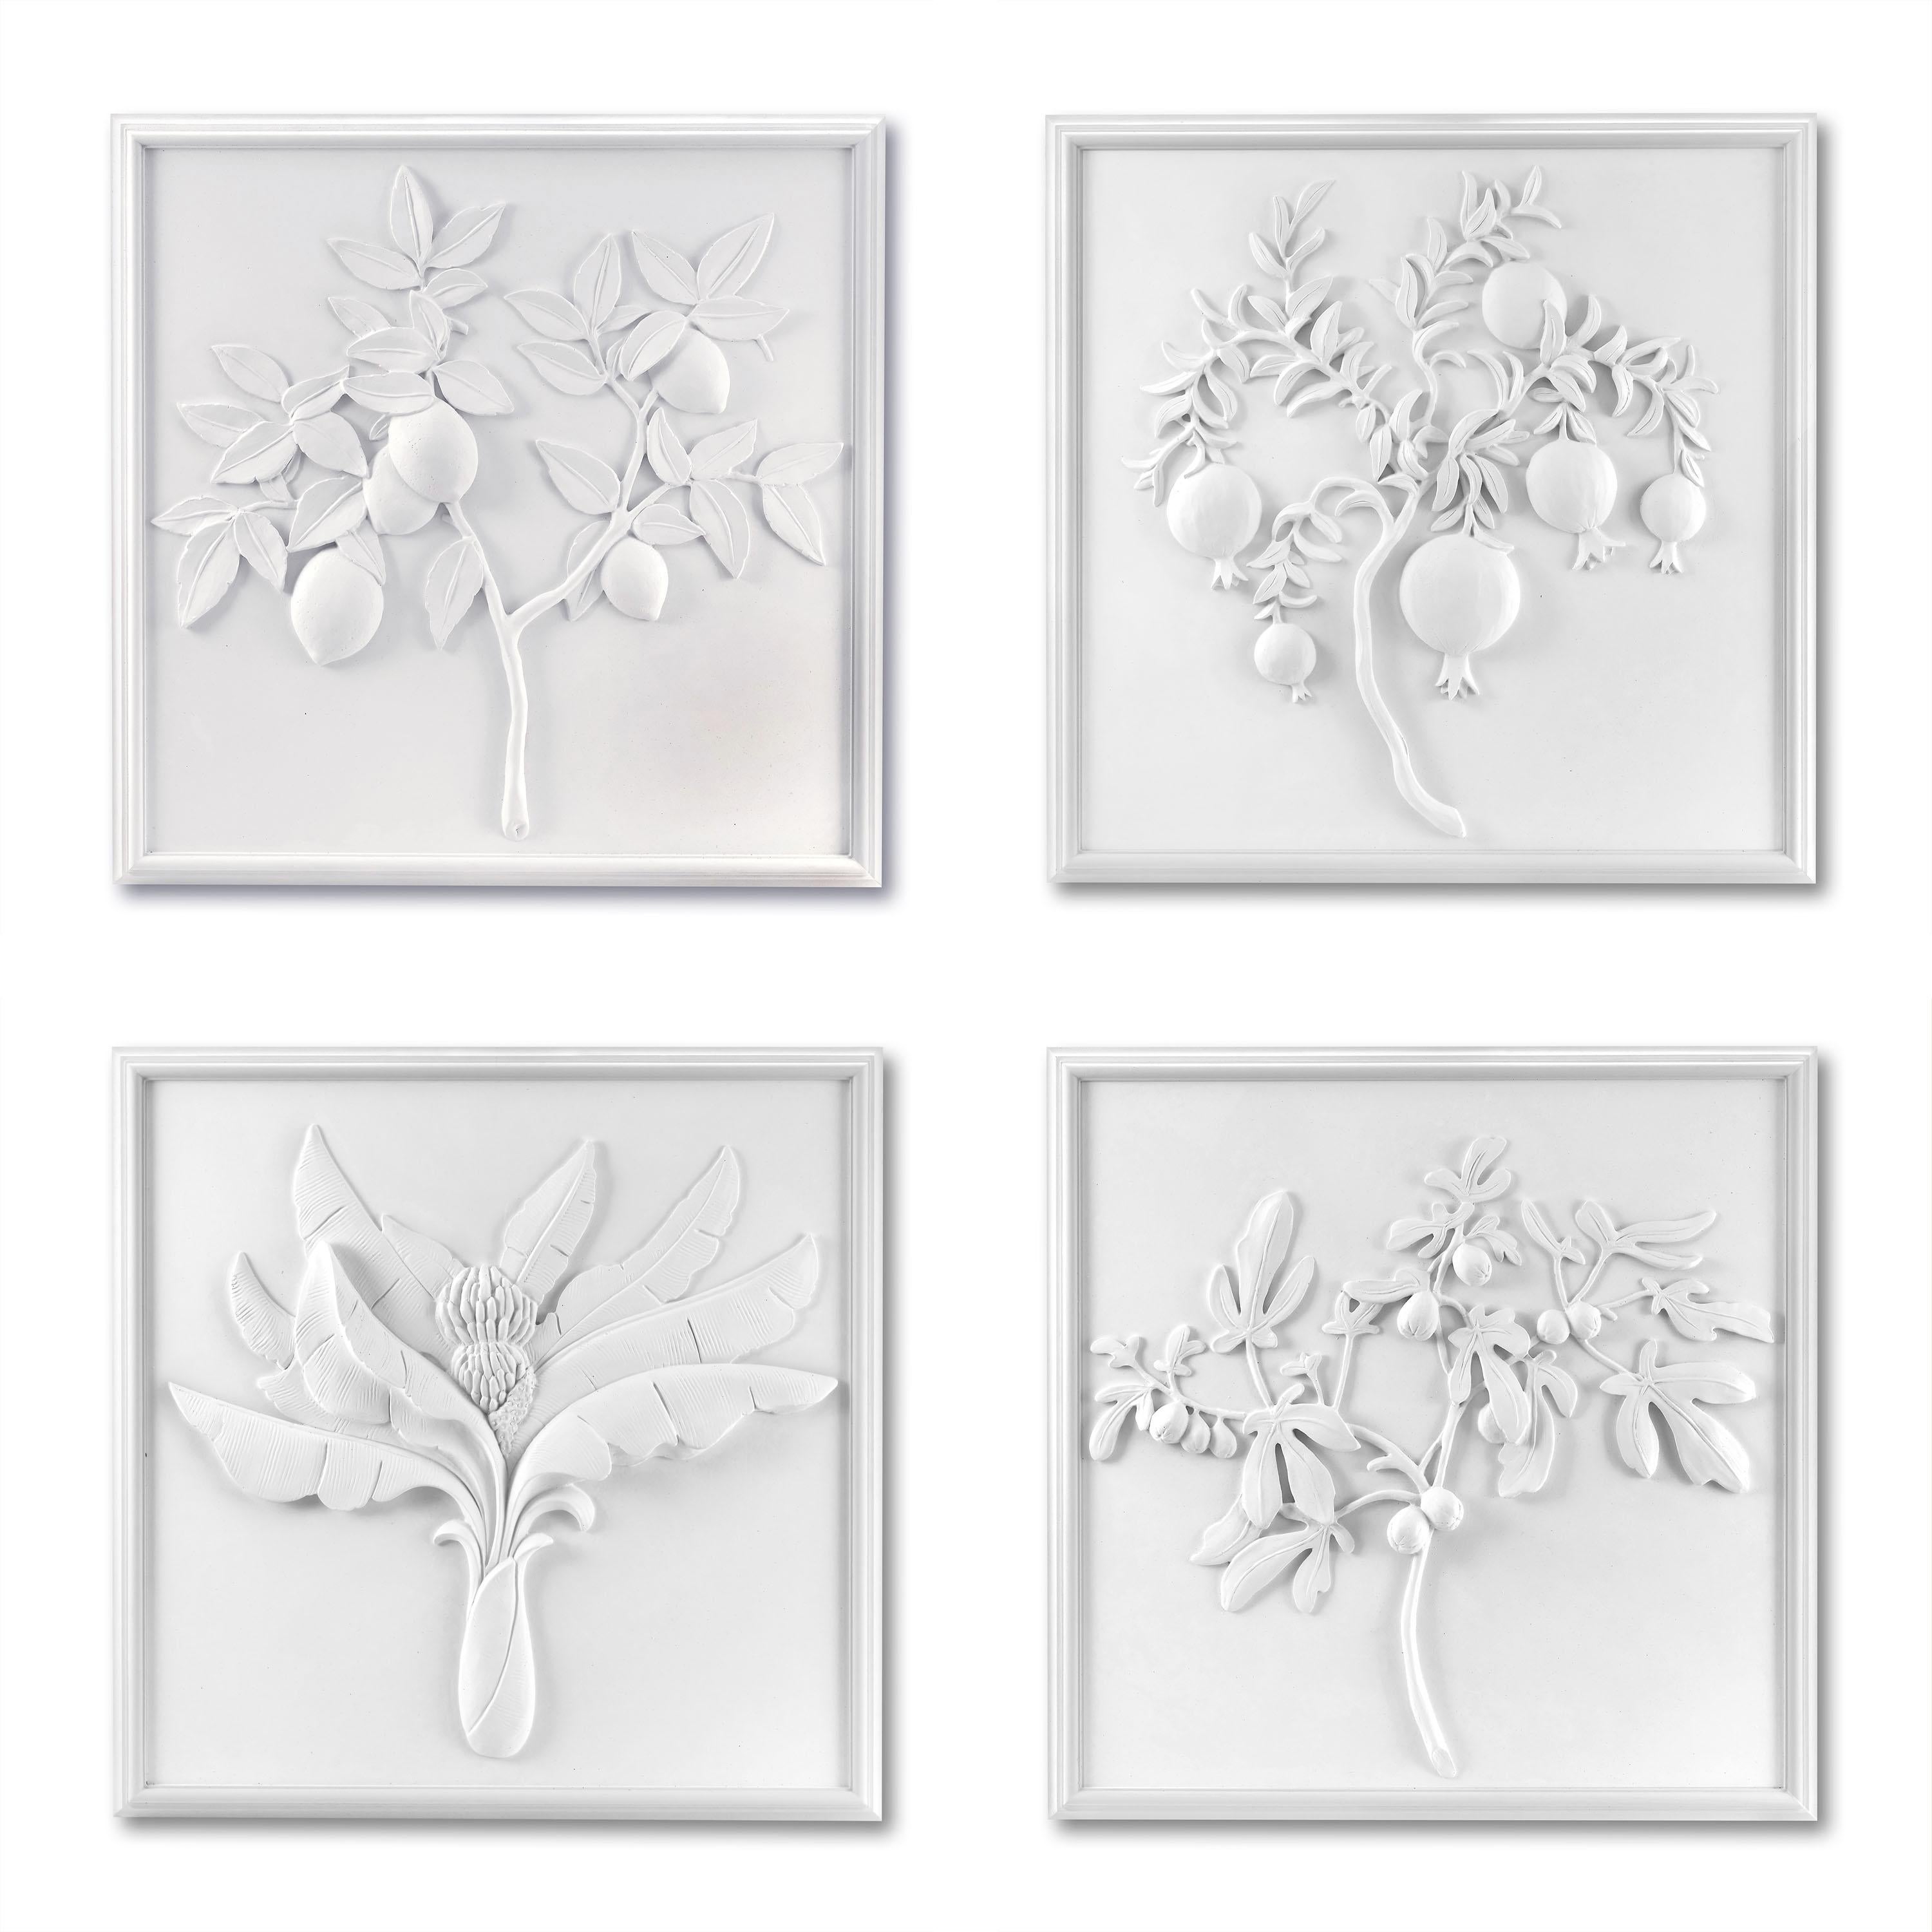 American Bunny Williams Home Set of 4 Plaster Fruit Panels For Sale